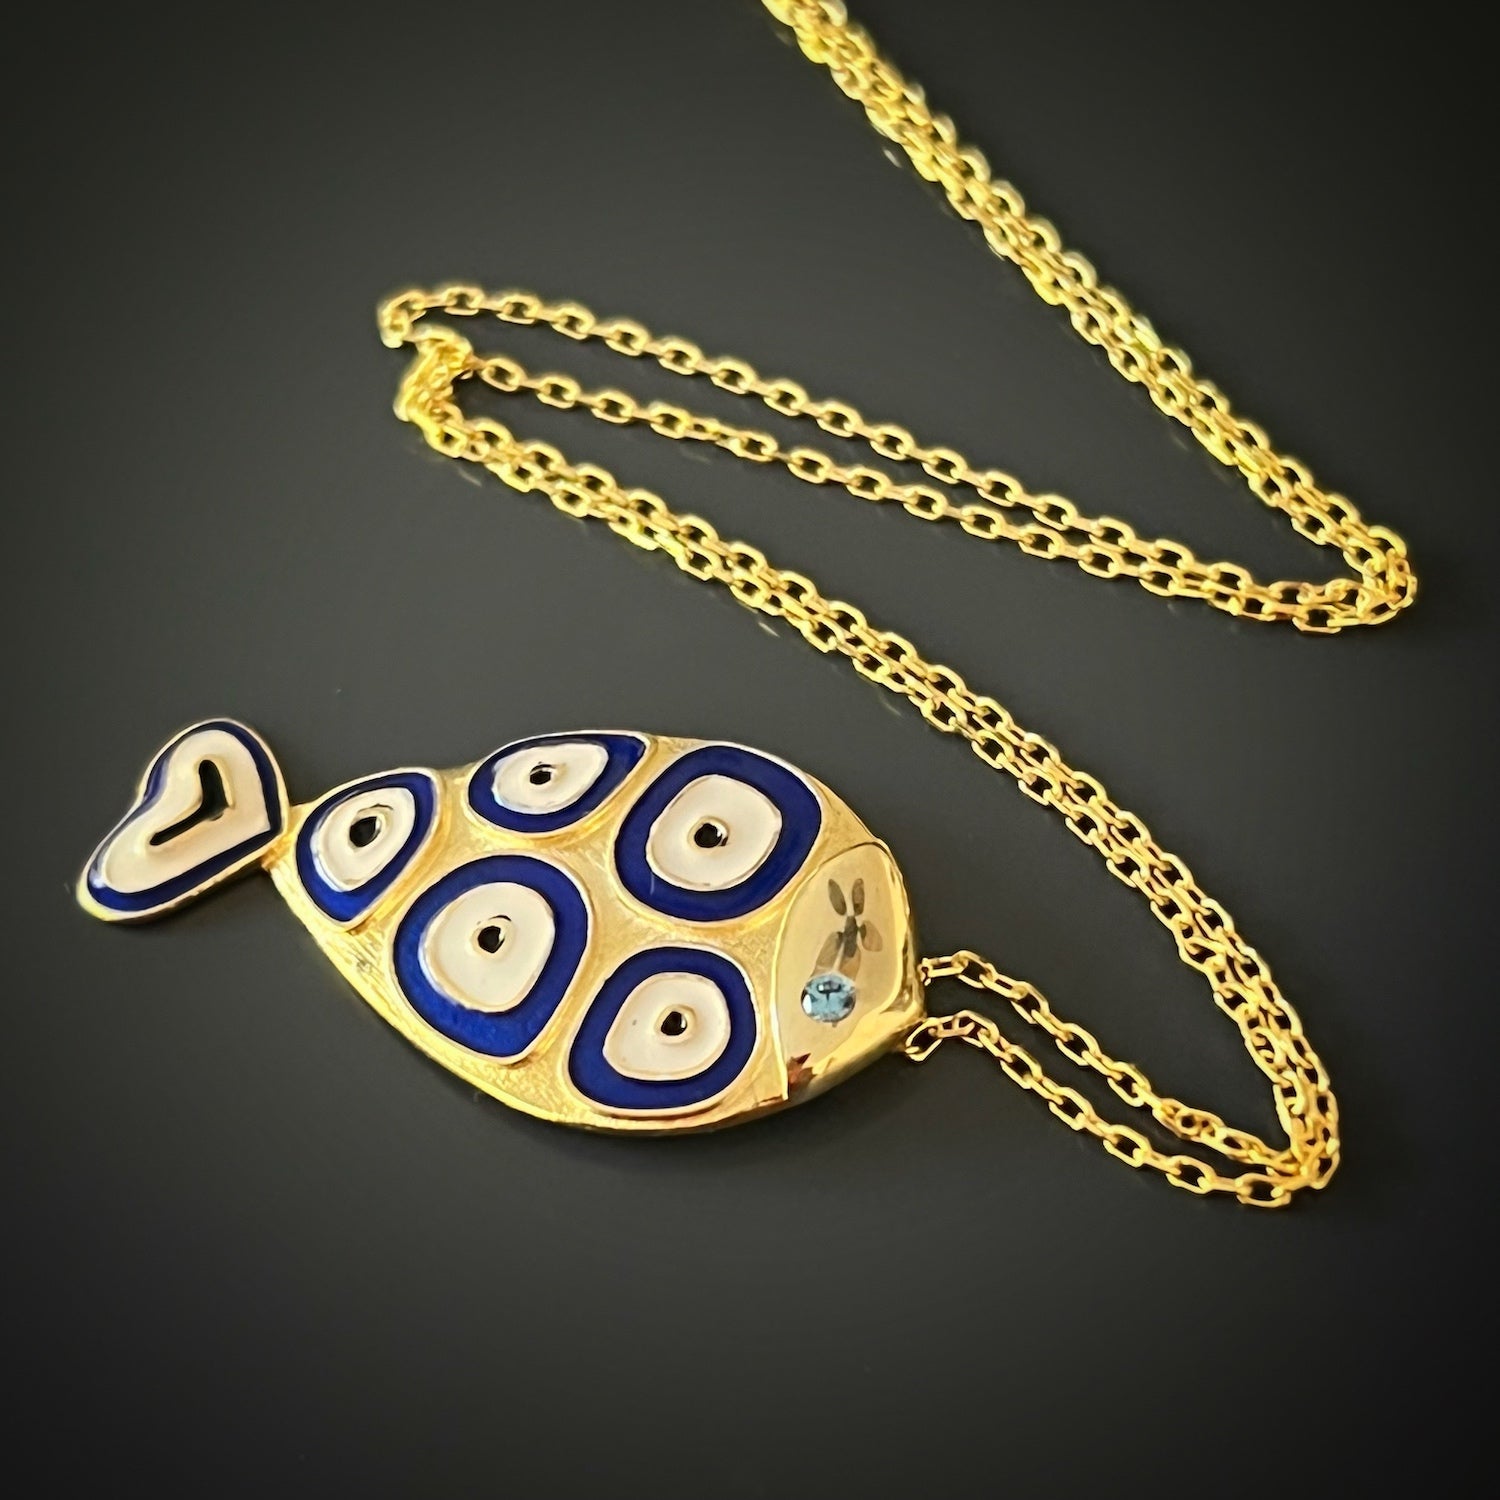 Handmade Gold and Blue Necklace - Elegant necklace showcasing a 925 Sterling silver fish pendant with blue enamel, complemented by evil eye designs, representing protection and positive energy.